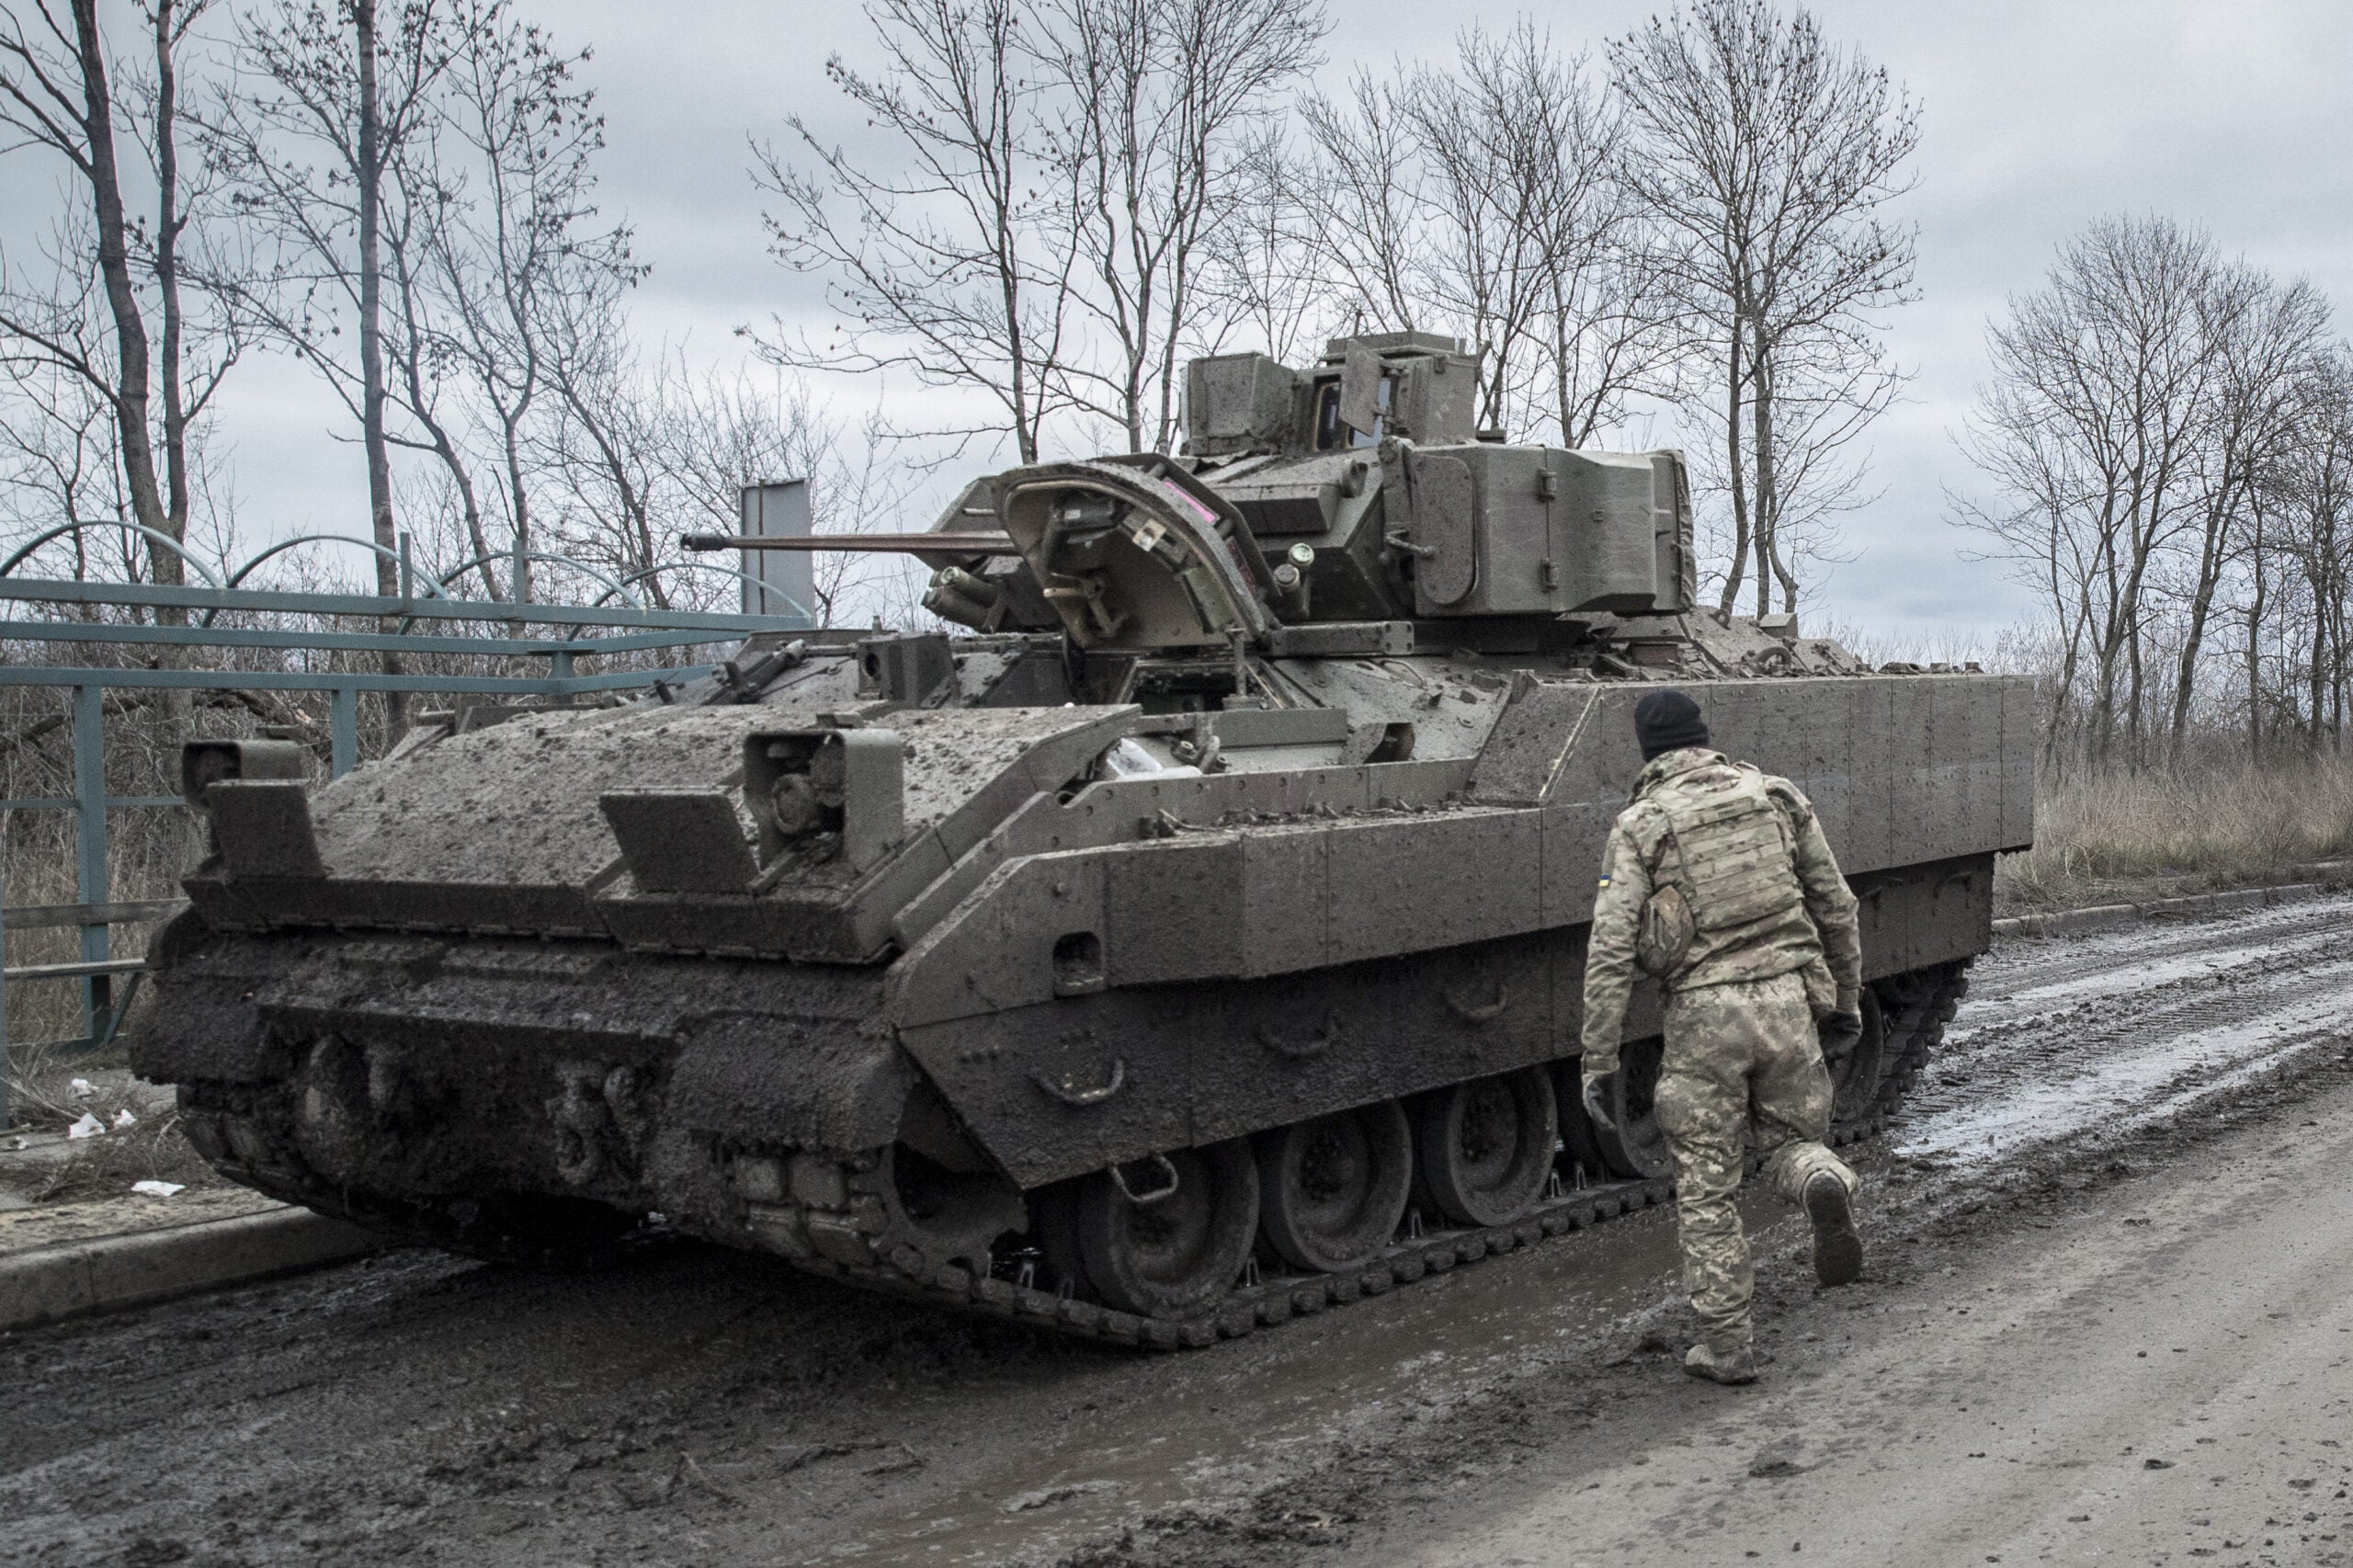 bradley fighting vehicles are taking out modern tanks in ukraine